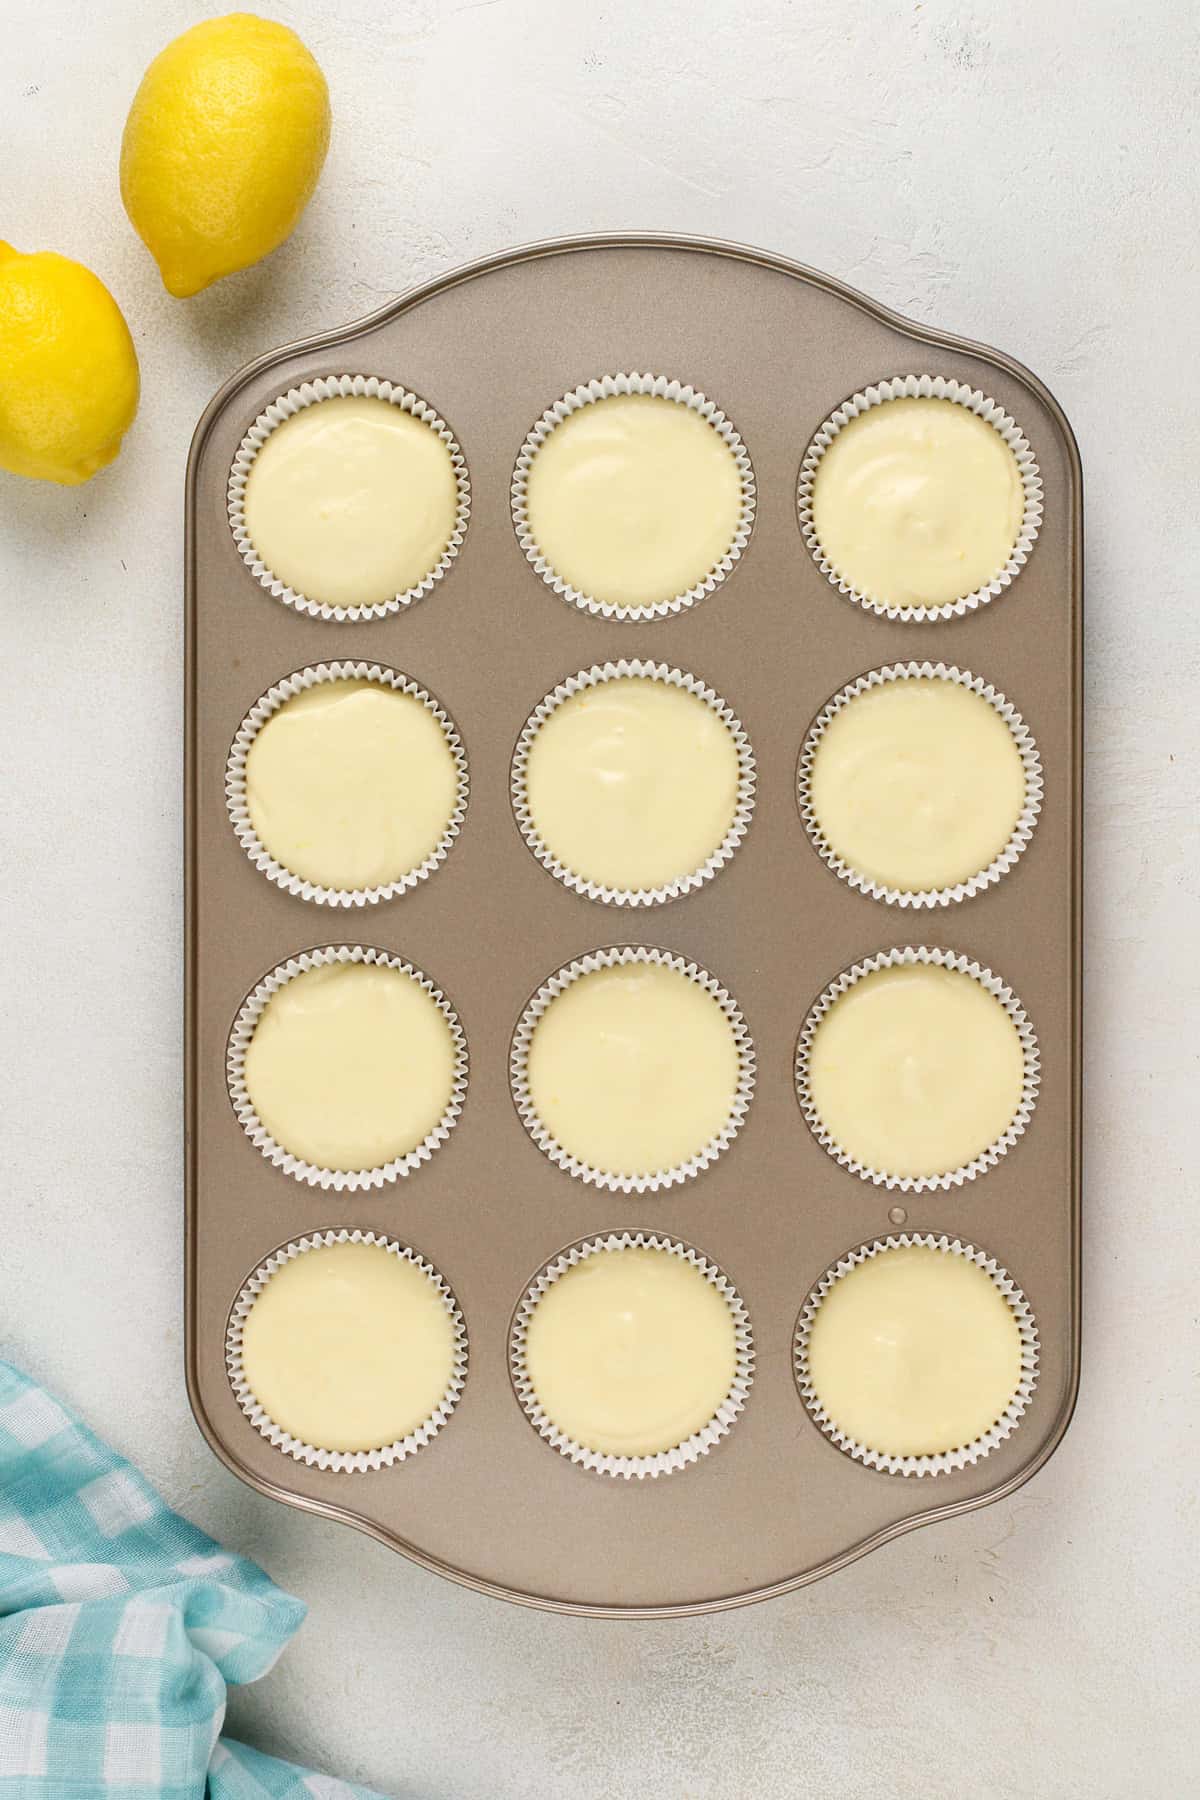 Unbaked mini lemon cheesecakes in a muffin tin, ready to go in the oven.